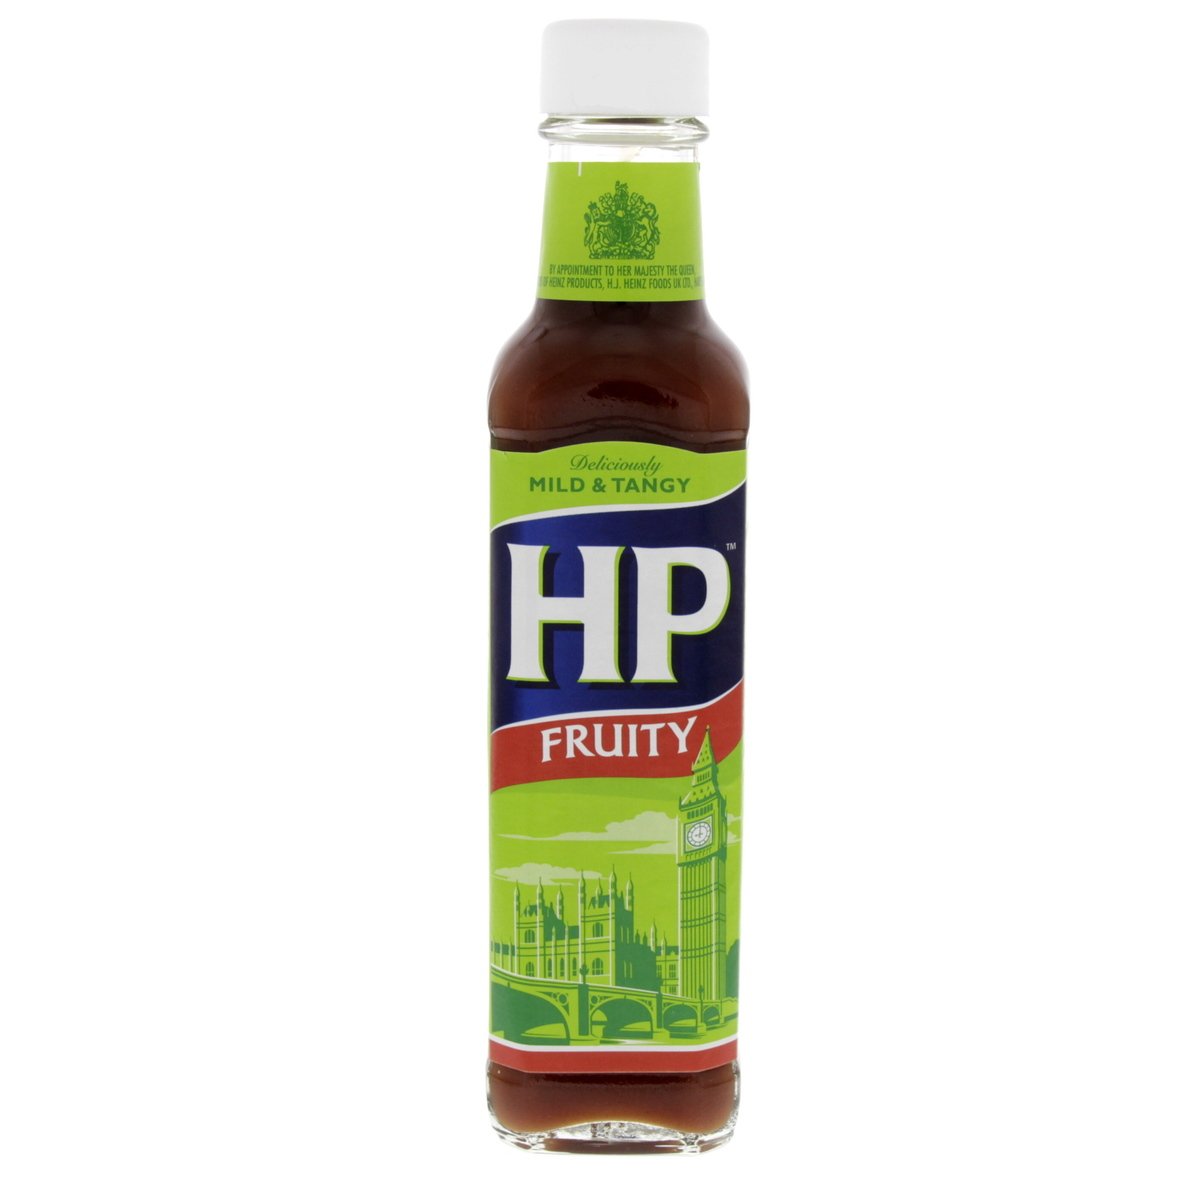 HP Fruity Mild & Tangy, 255 g